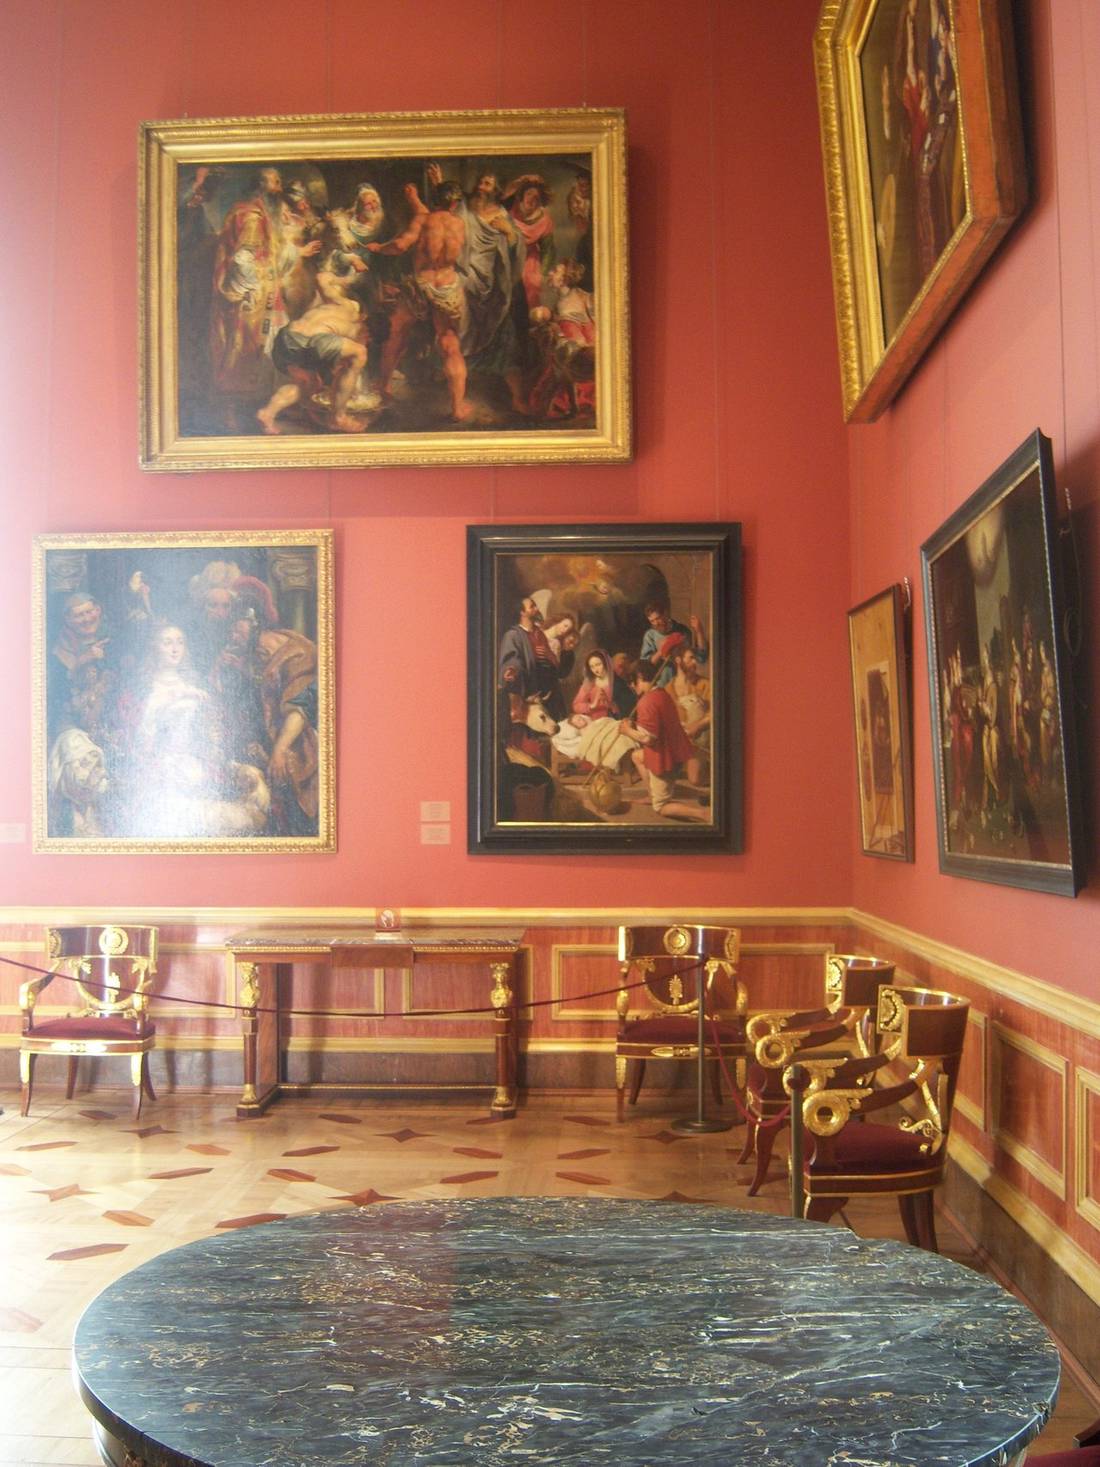 The majestic paintings of the Hermitage